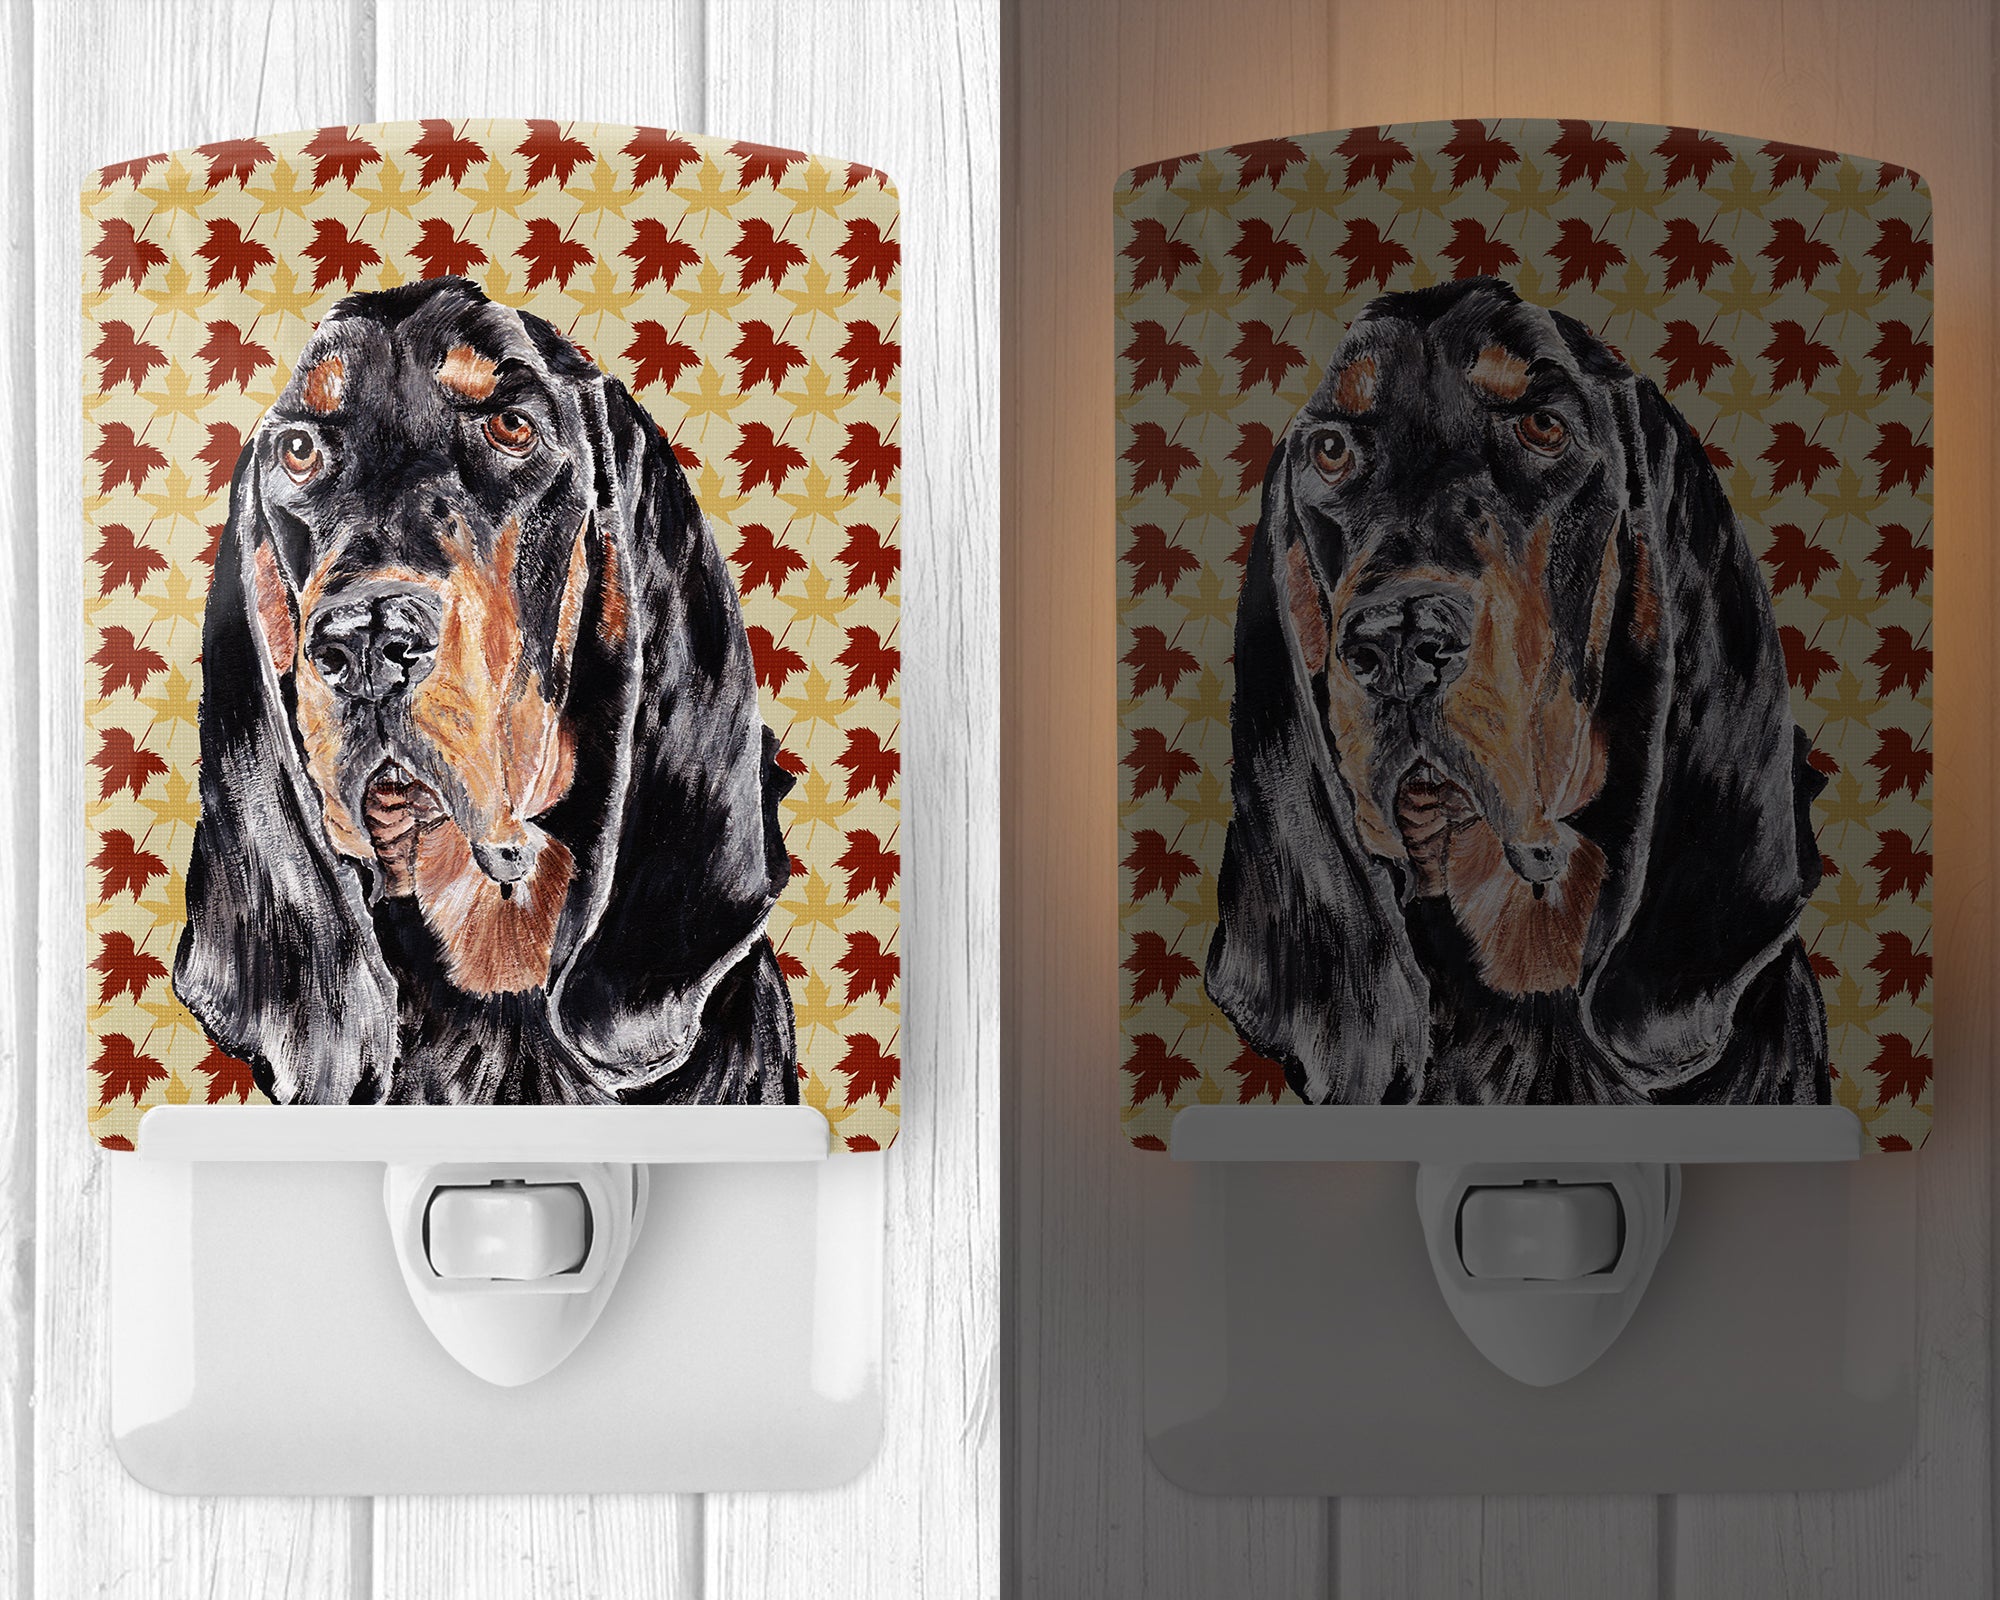 Black and Tan Coonhound Fall Leaves Ceramic Night Light SC9539CNL - the-store.com